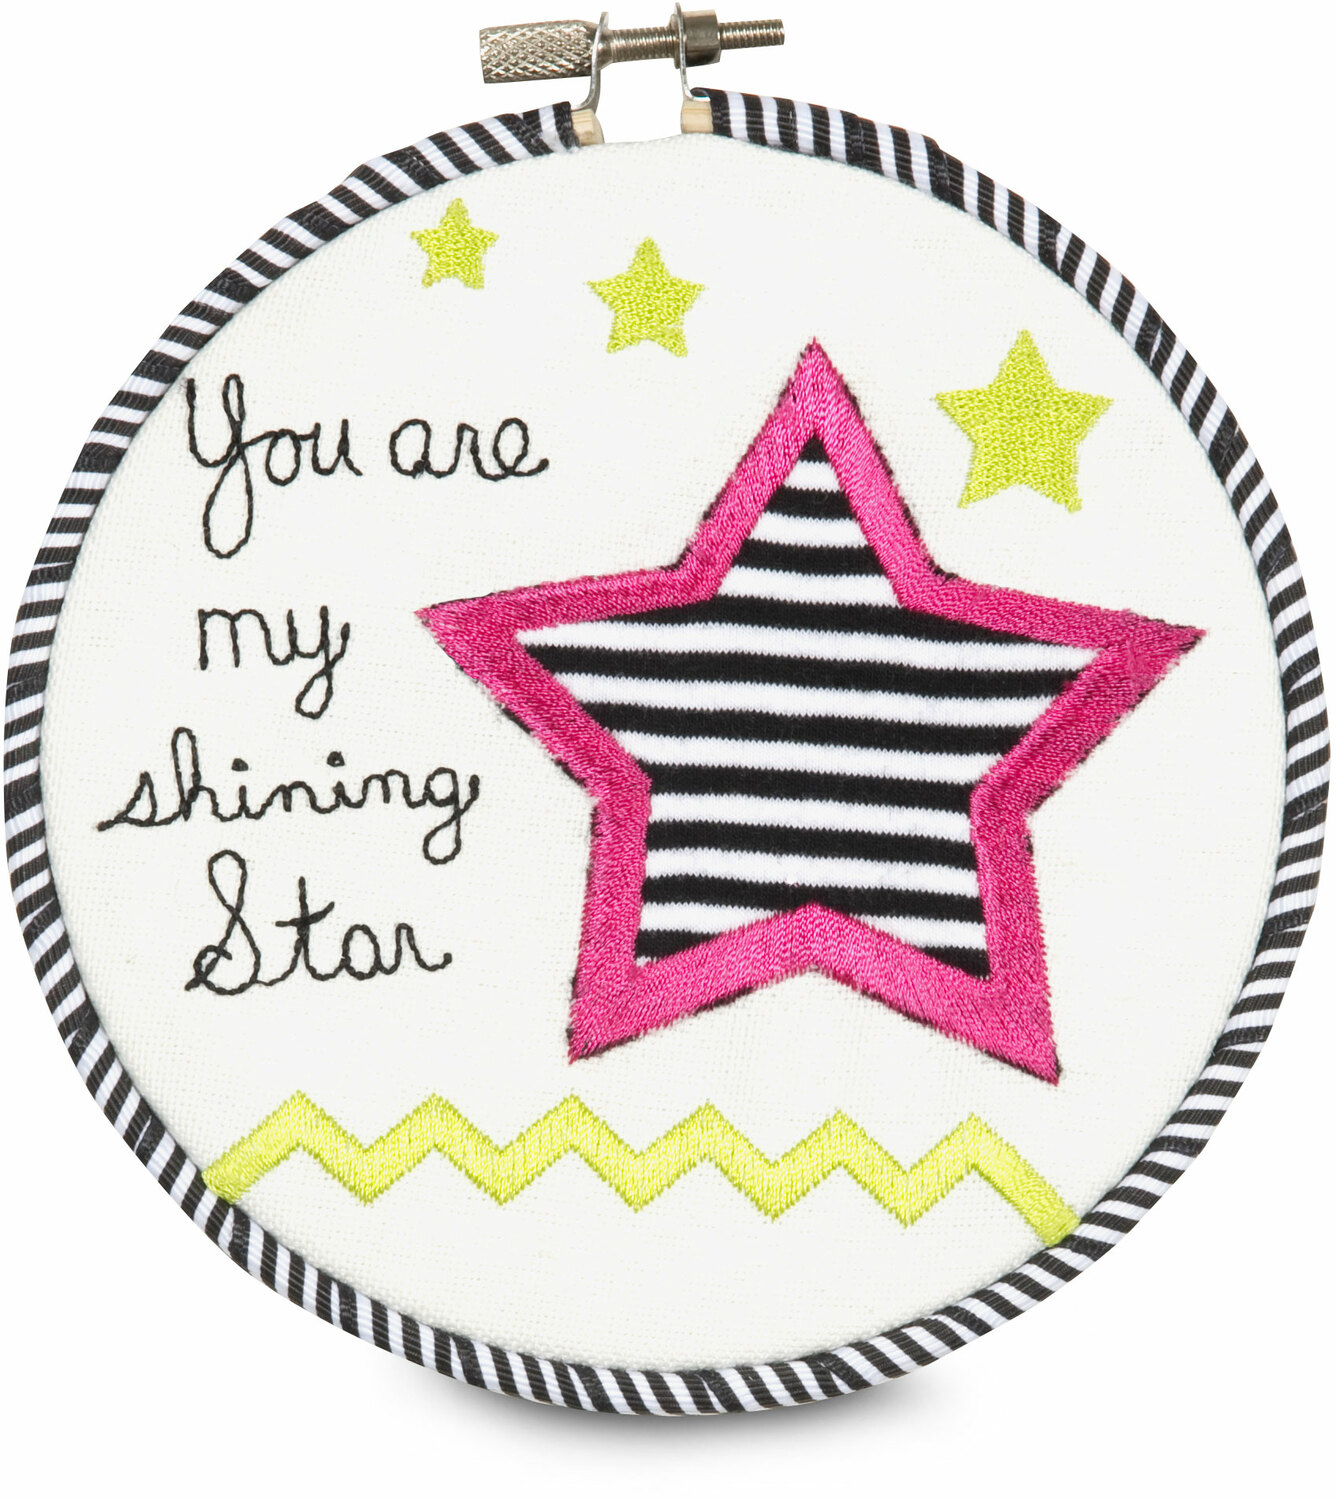 Sassy Diva by Itty Bitty & Pretty - Sassy Diva - You are my shining star 5.5" Wall Covering